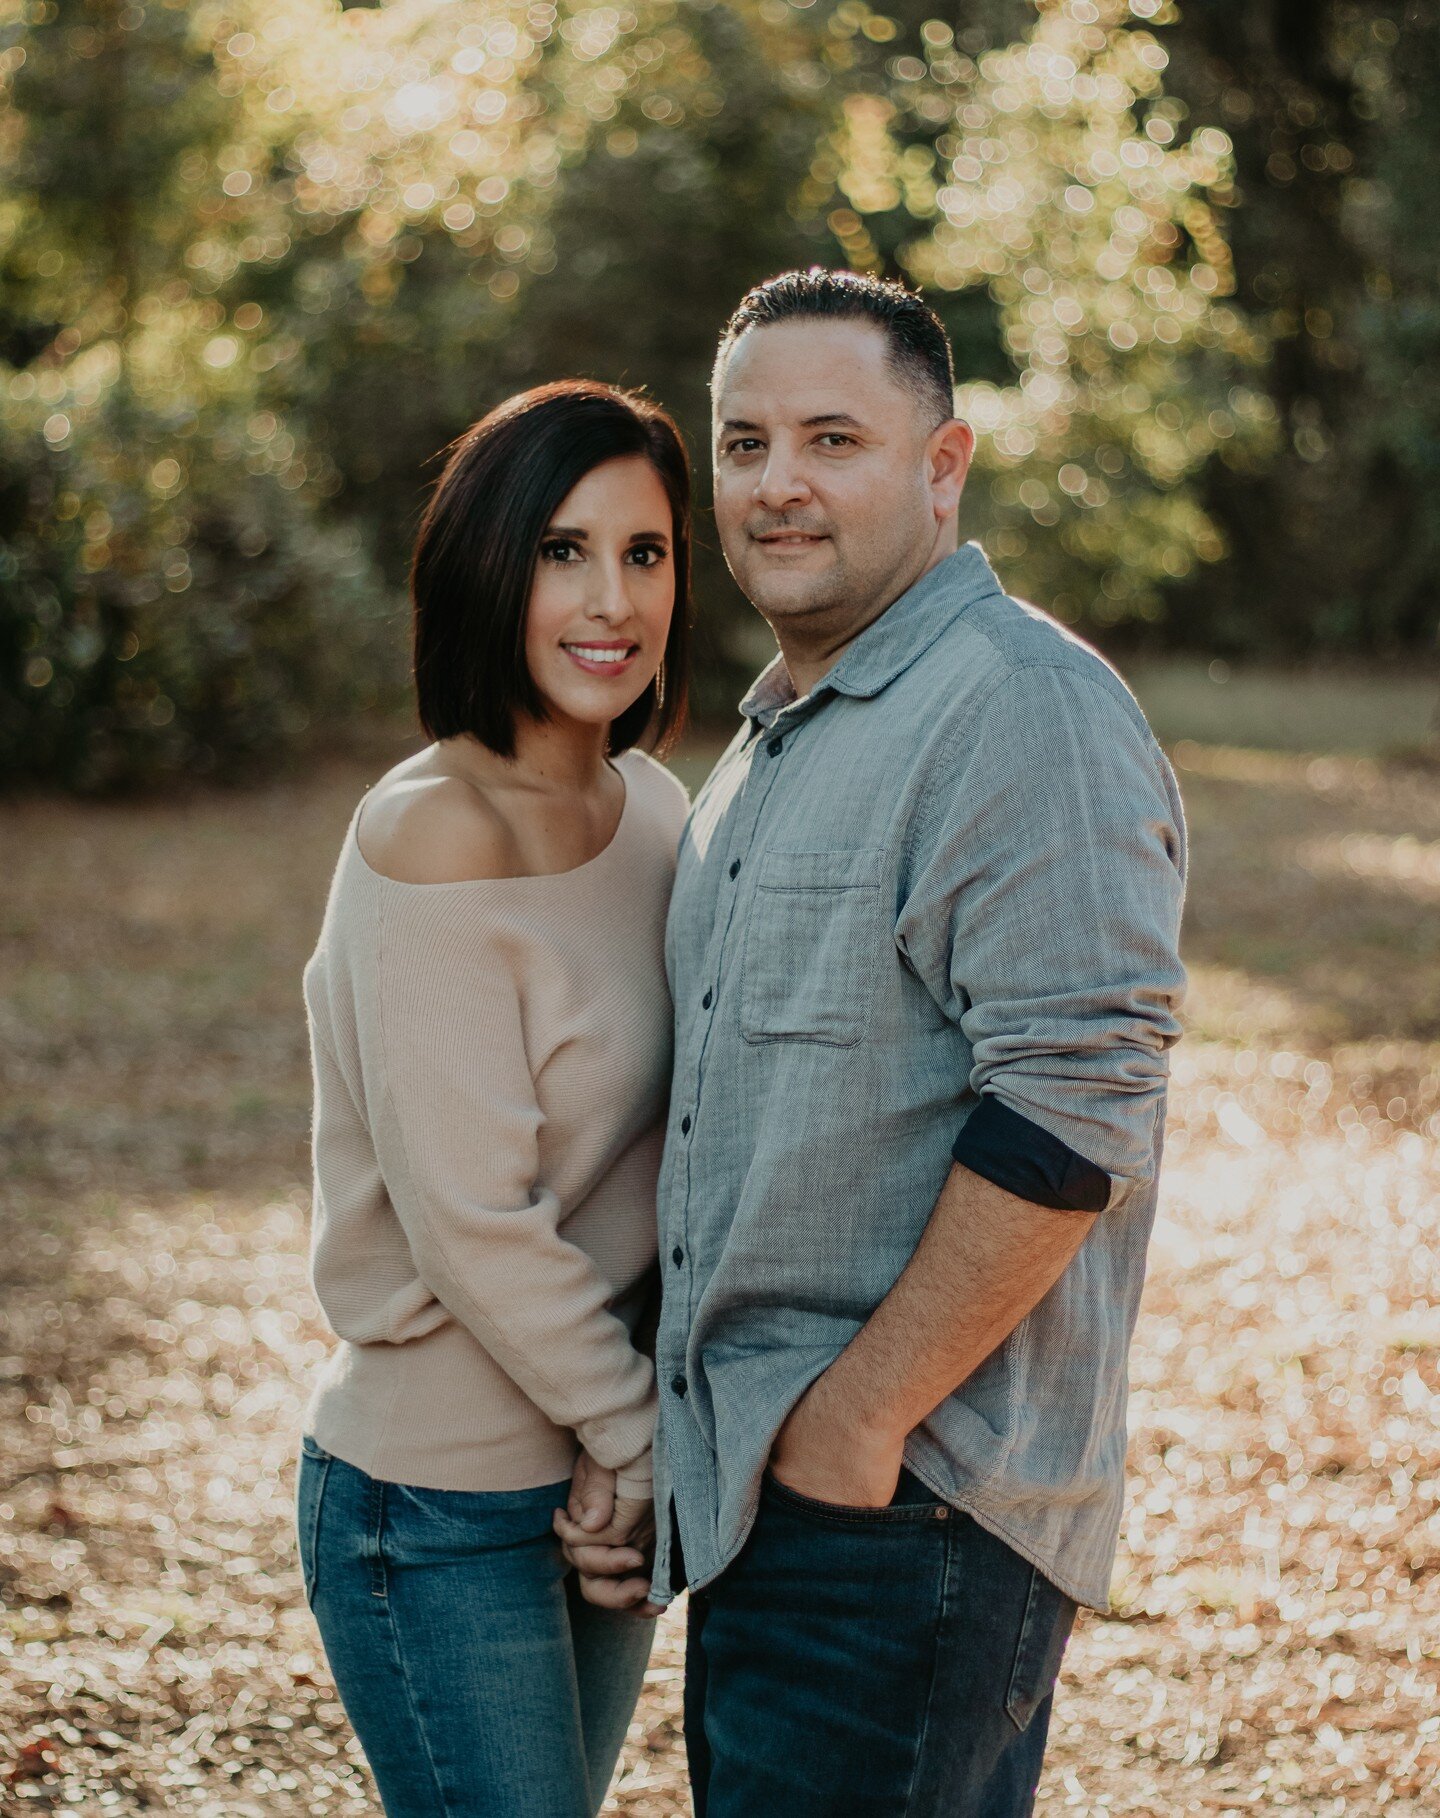 Loved this backyard anniversary shoot with these two!!